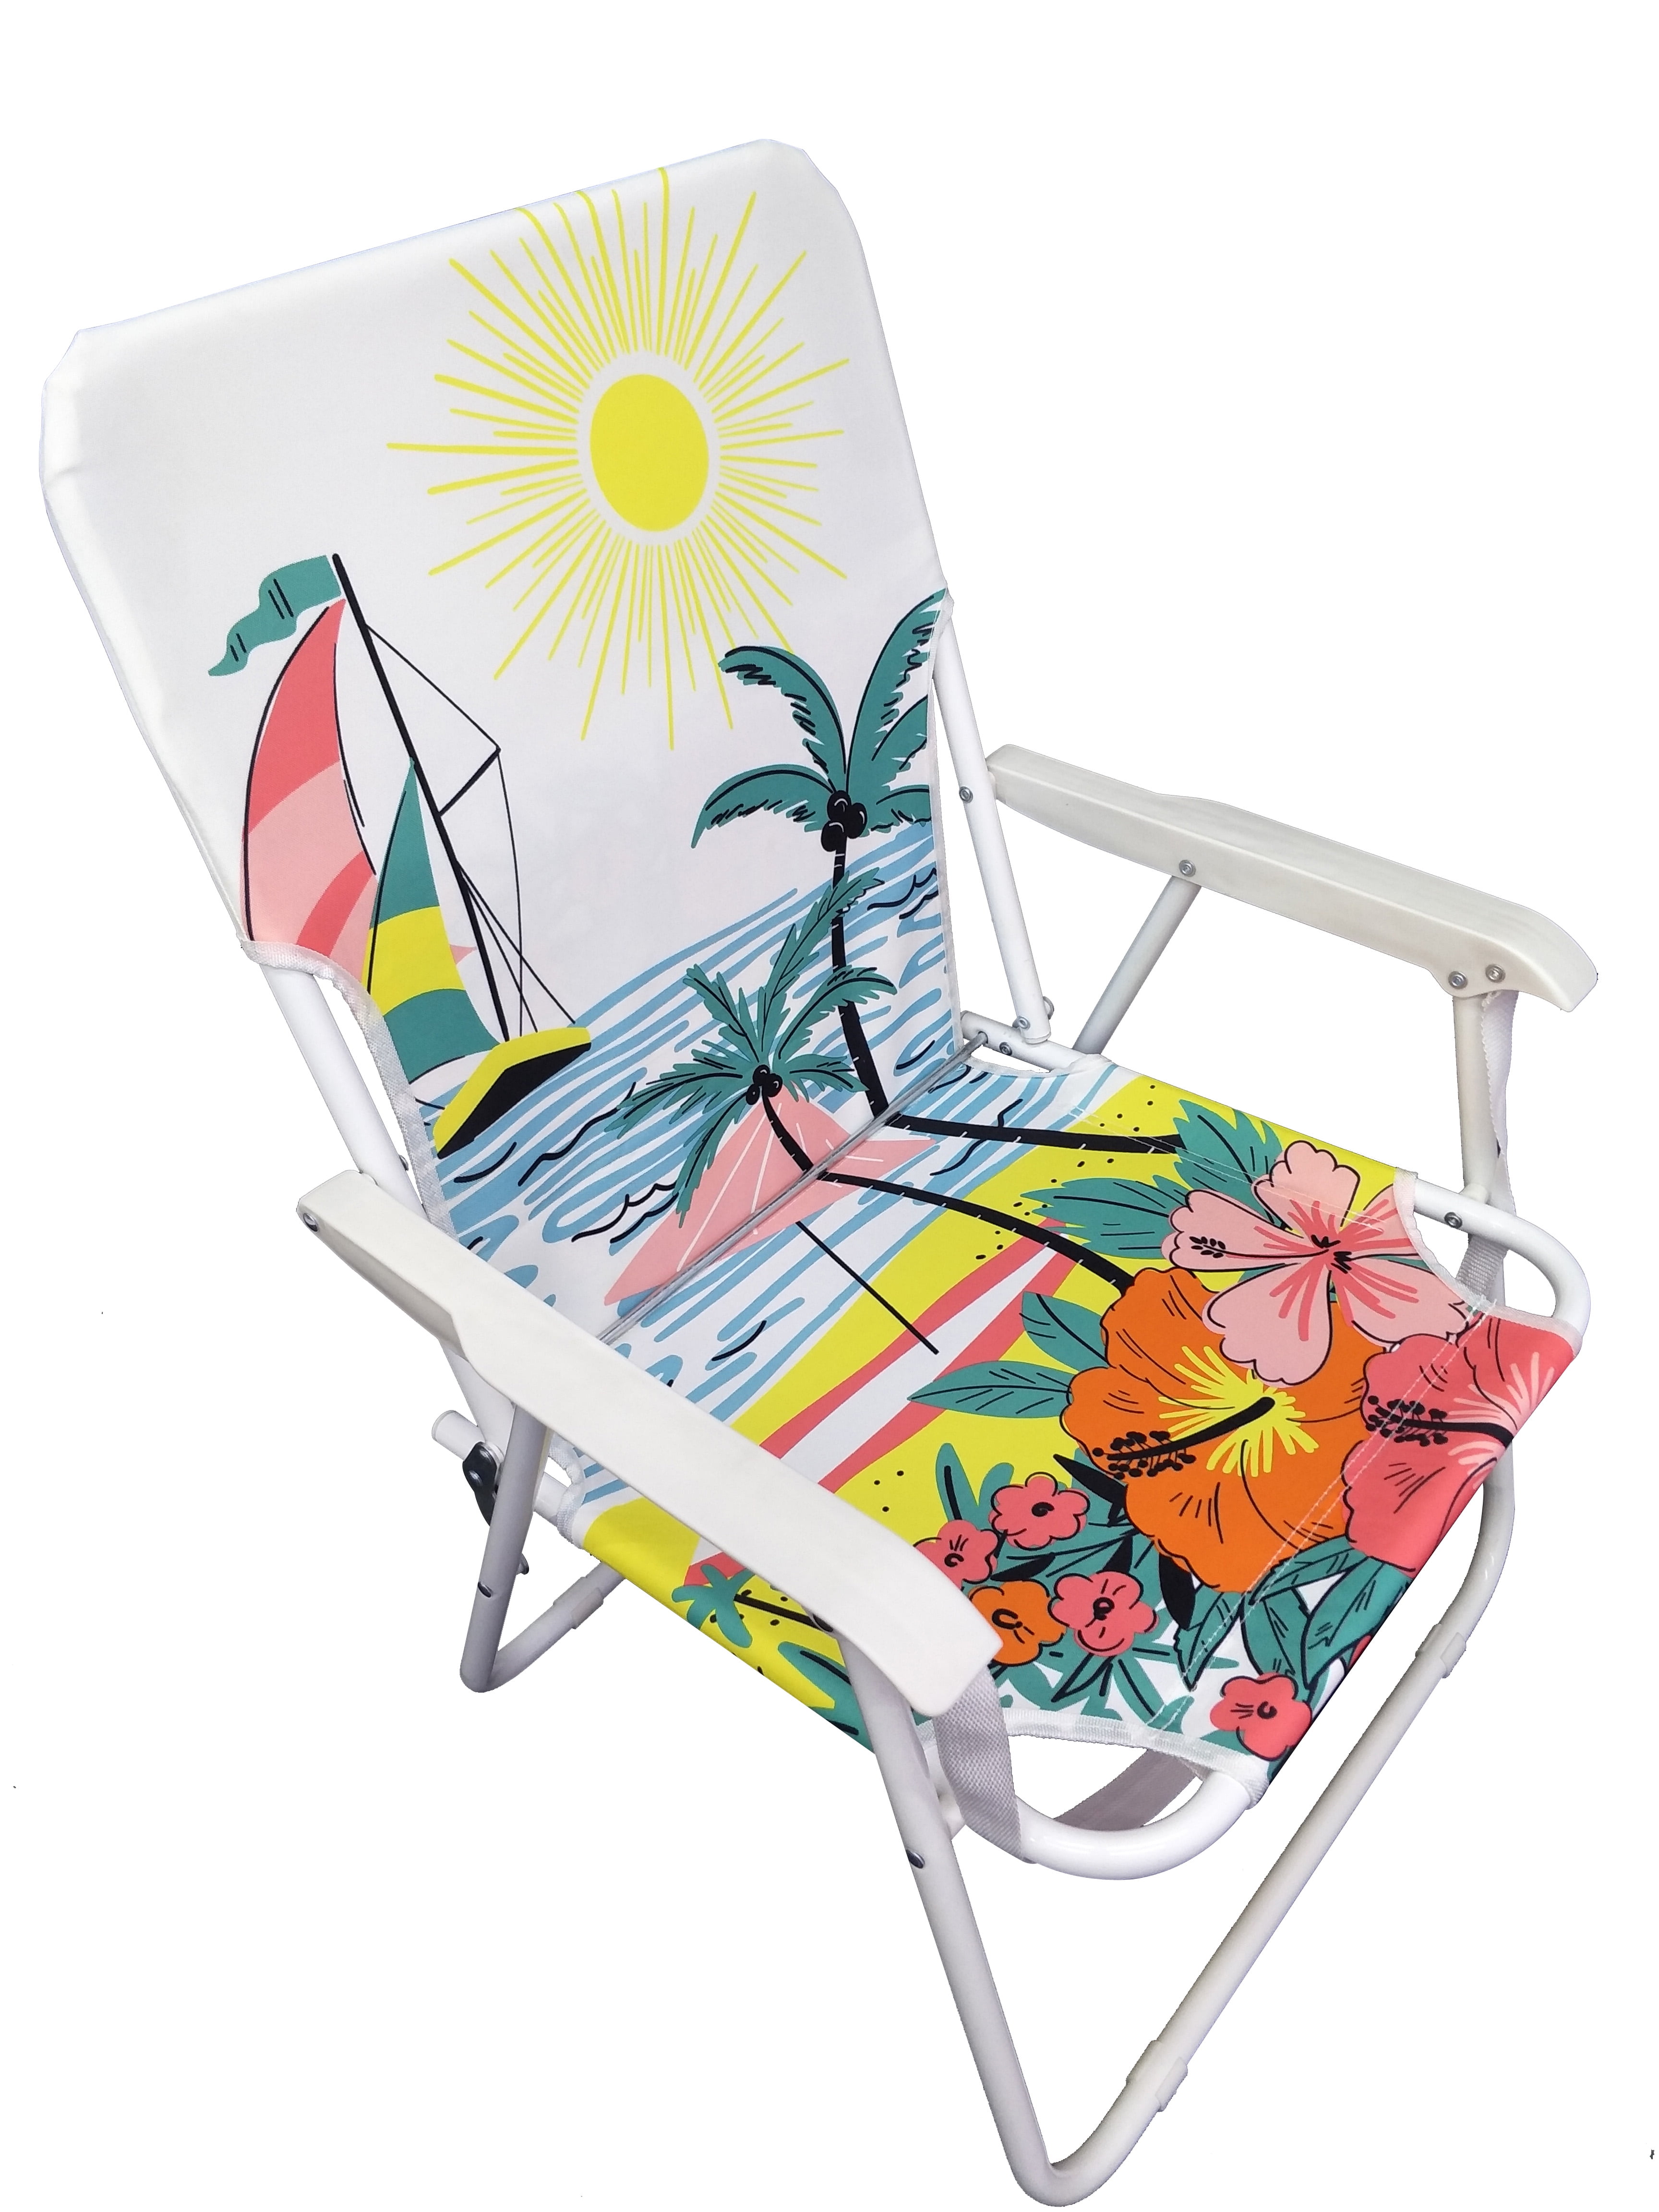 Creatice Low Seat Sand Beach Chair with Simple Decor